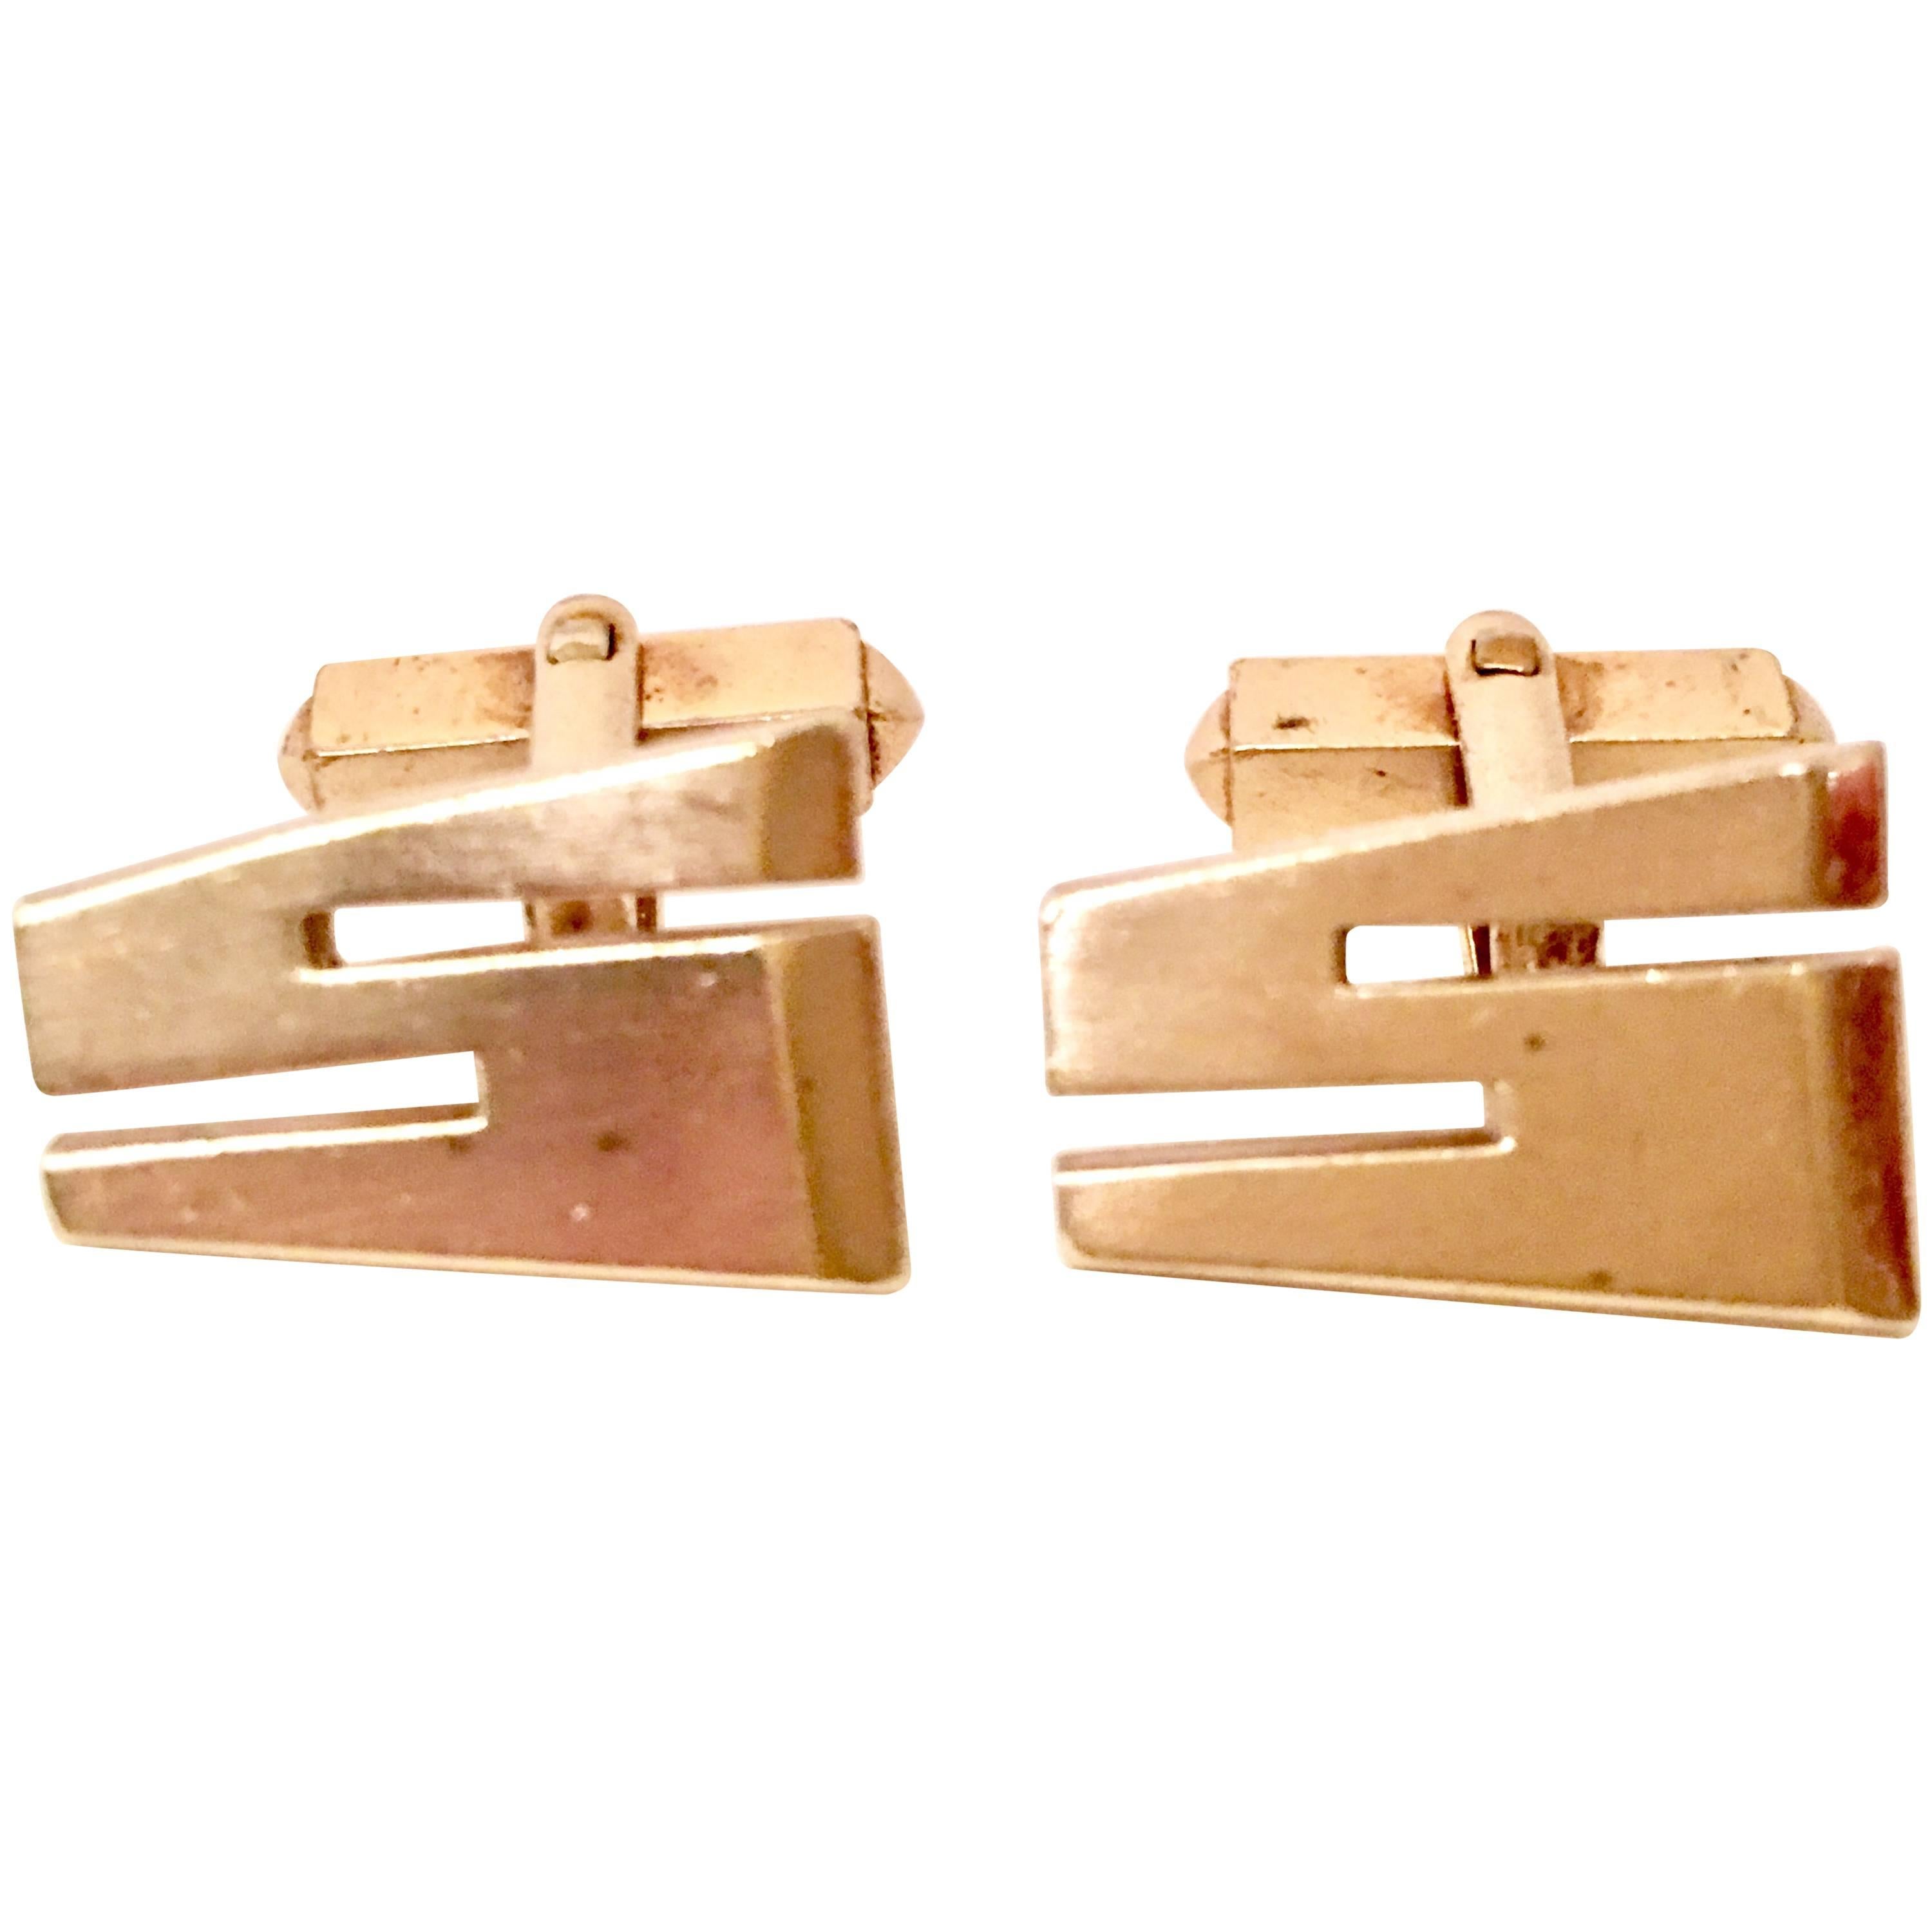 Vintage Pair Of Gold Plate "S" Cuff Links By, Swank